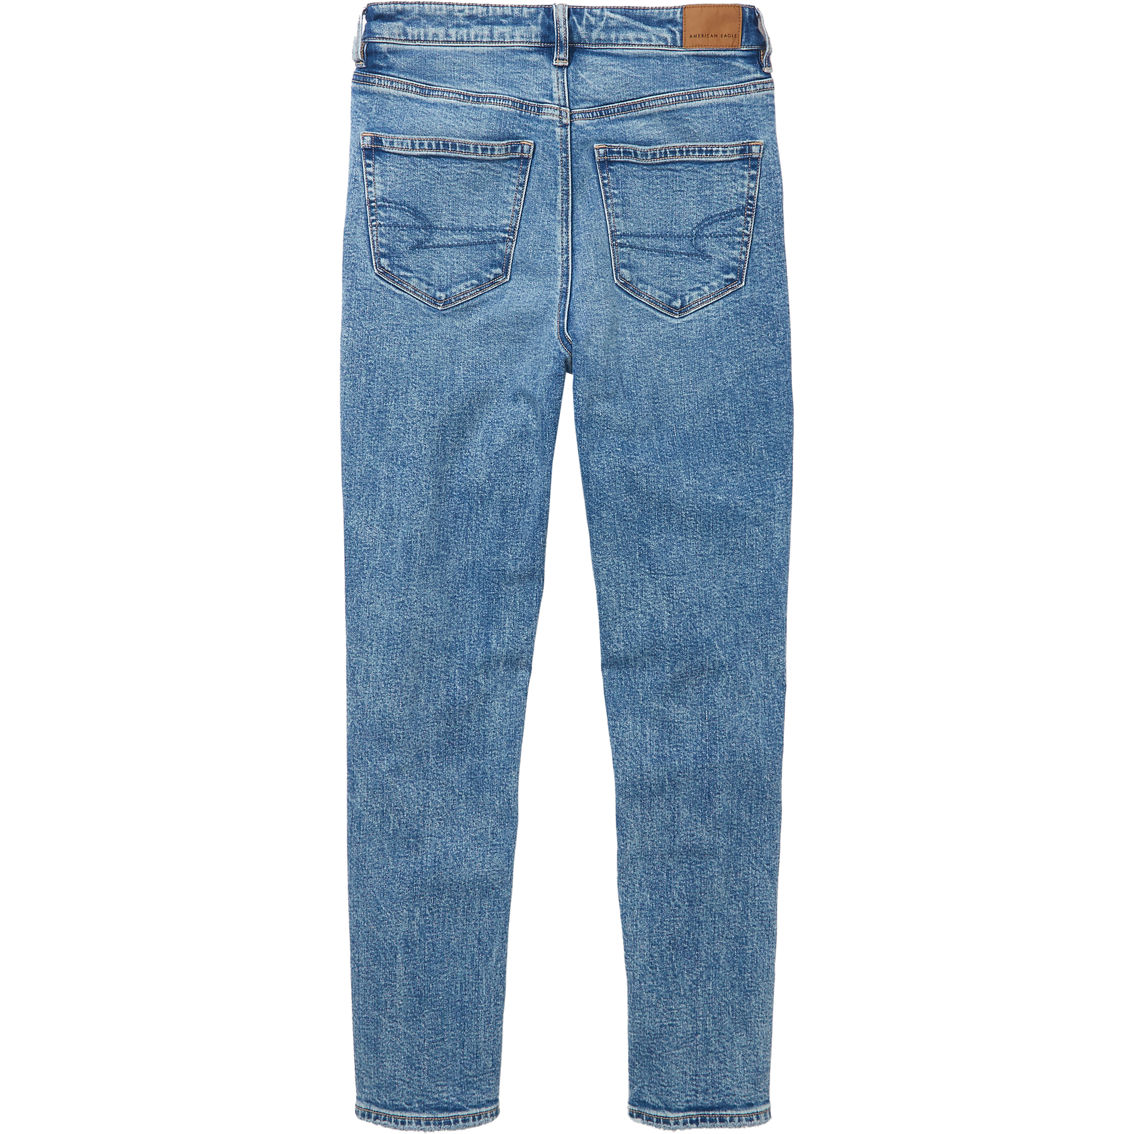 American Eagle Strigid Ripped Mom Jeans | Jeans | Clothing ...